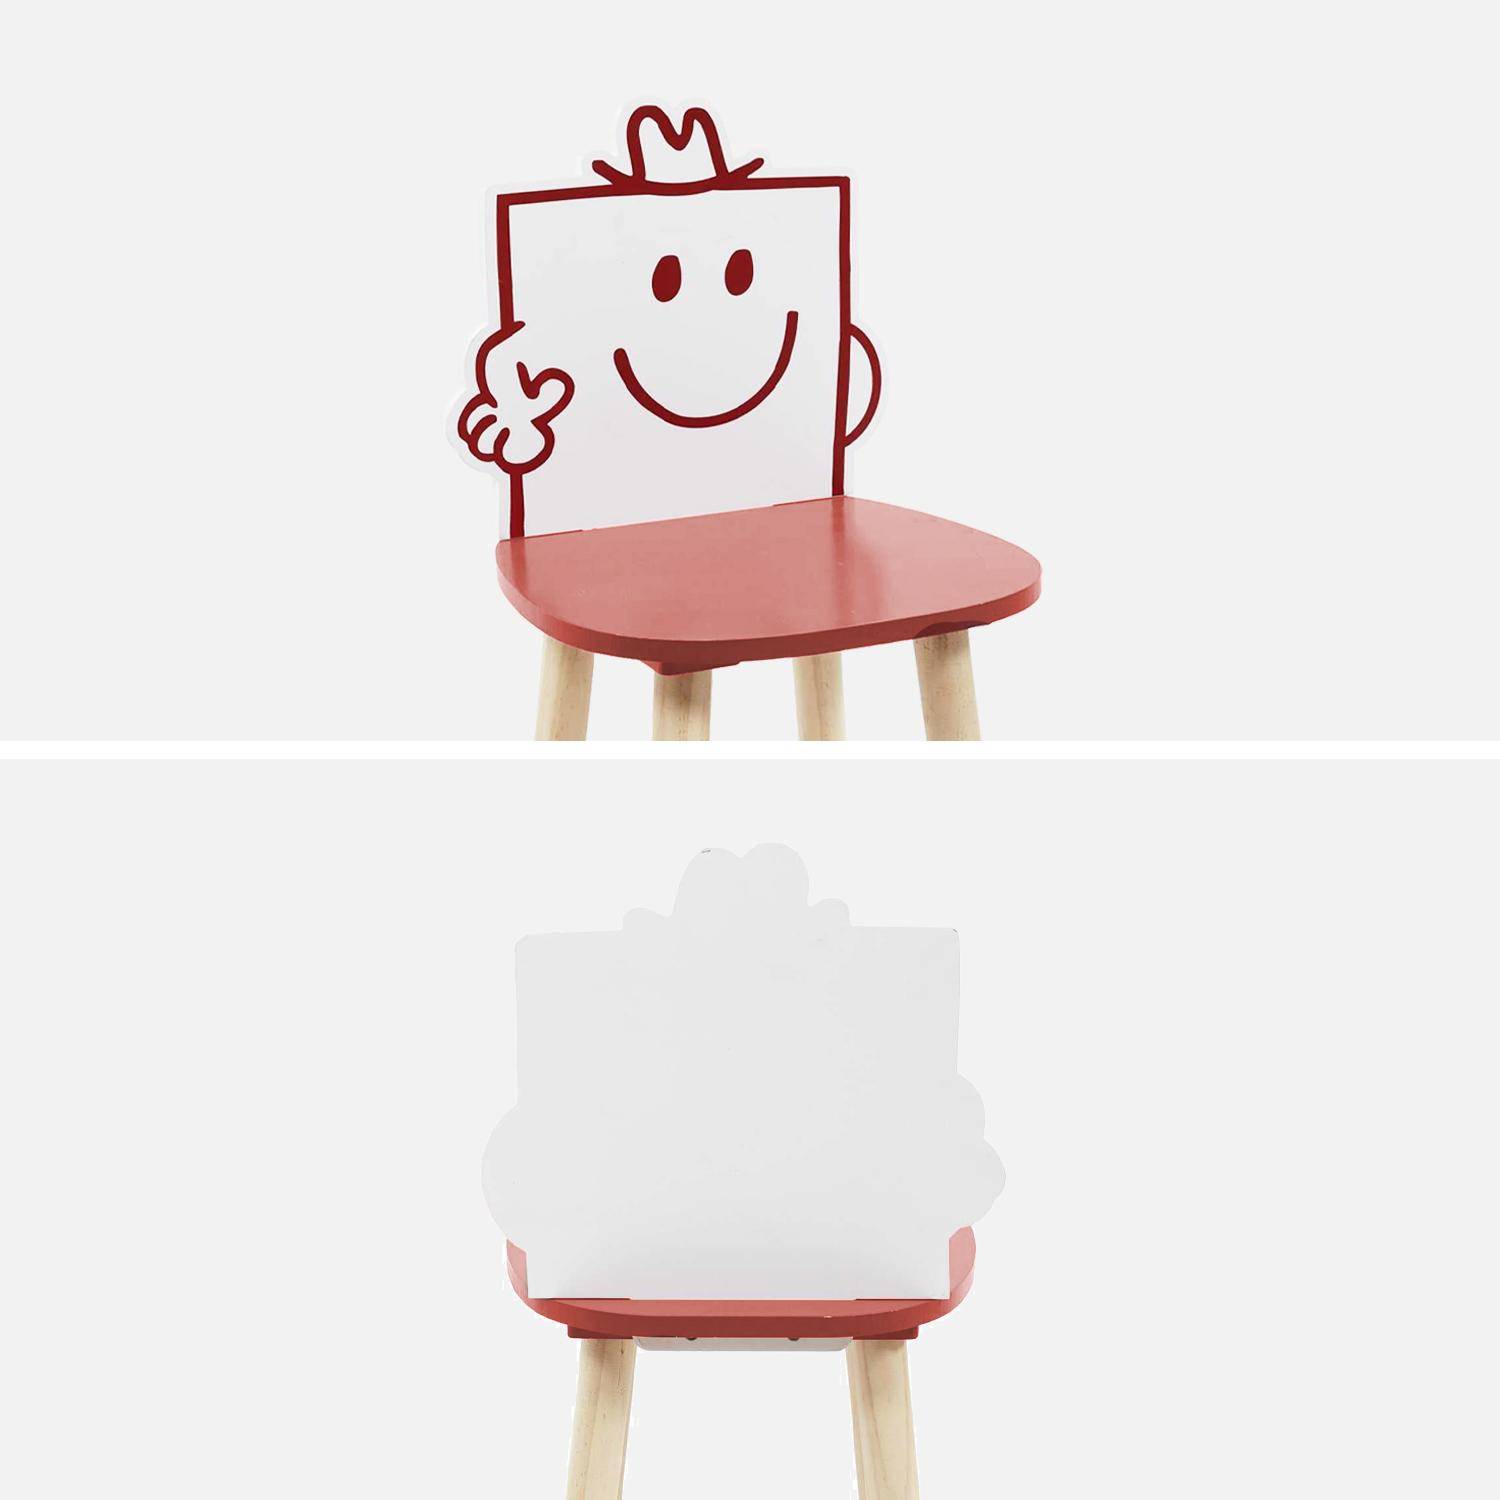 Set of 2 children's chairs, Mr. Men & Little Miss collection - Mr. Strong , Pierre, red,sweeek,Photo6